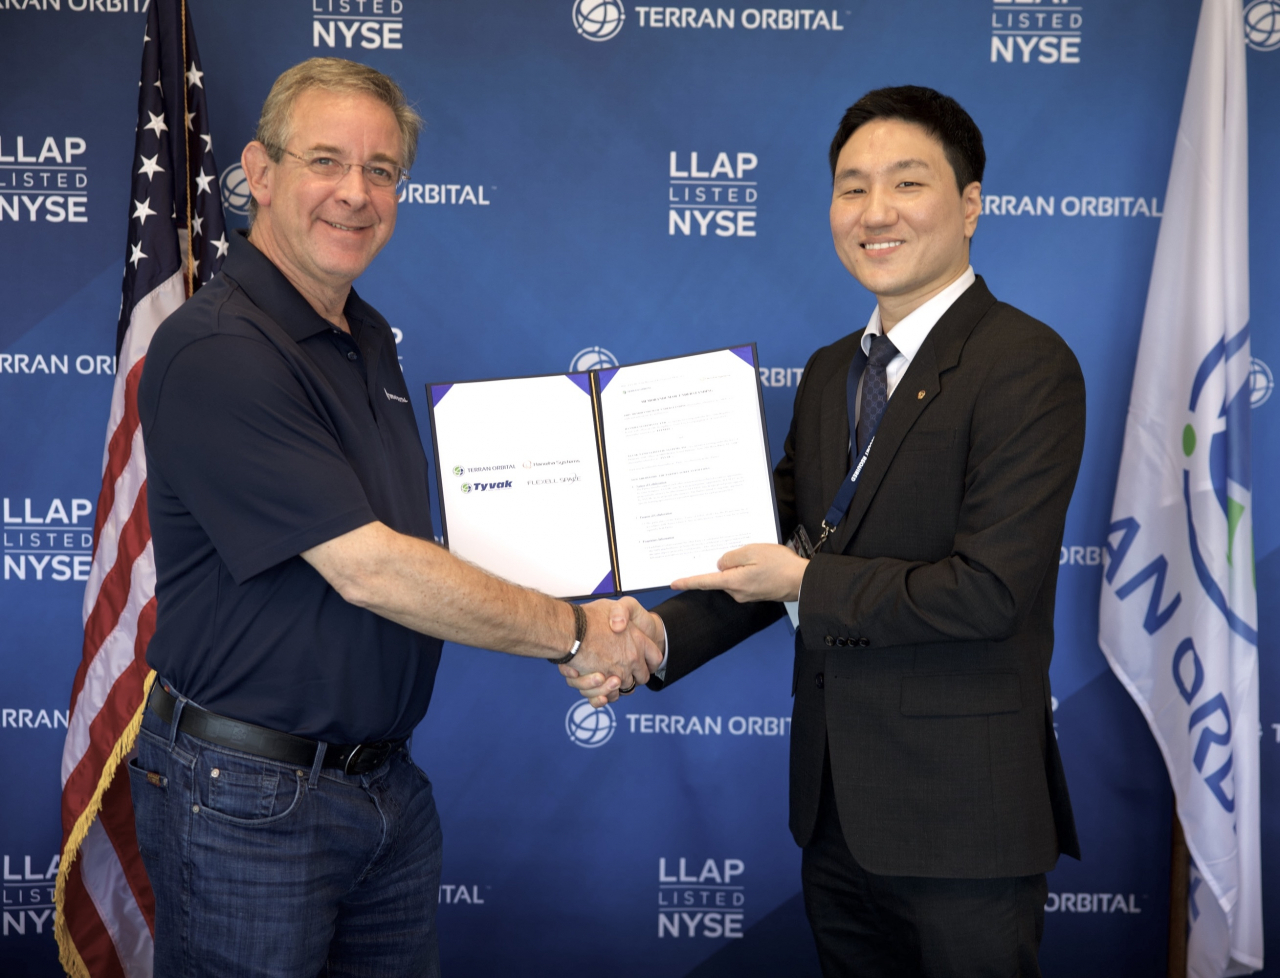 Ahn Tae-hun (right), CEO of Flexell Space, and Marc Bell, CEO of Terran Orbital, shake hands after signing a memorandum of understanding on June 25. (Hanwha Systems)